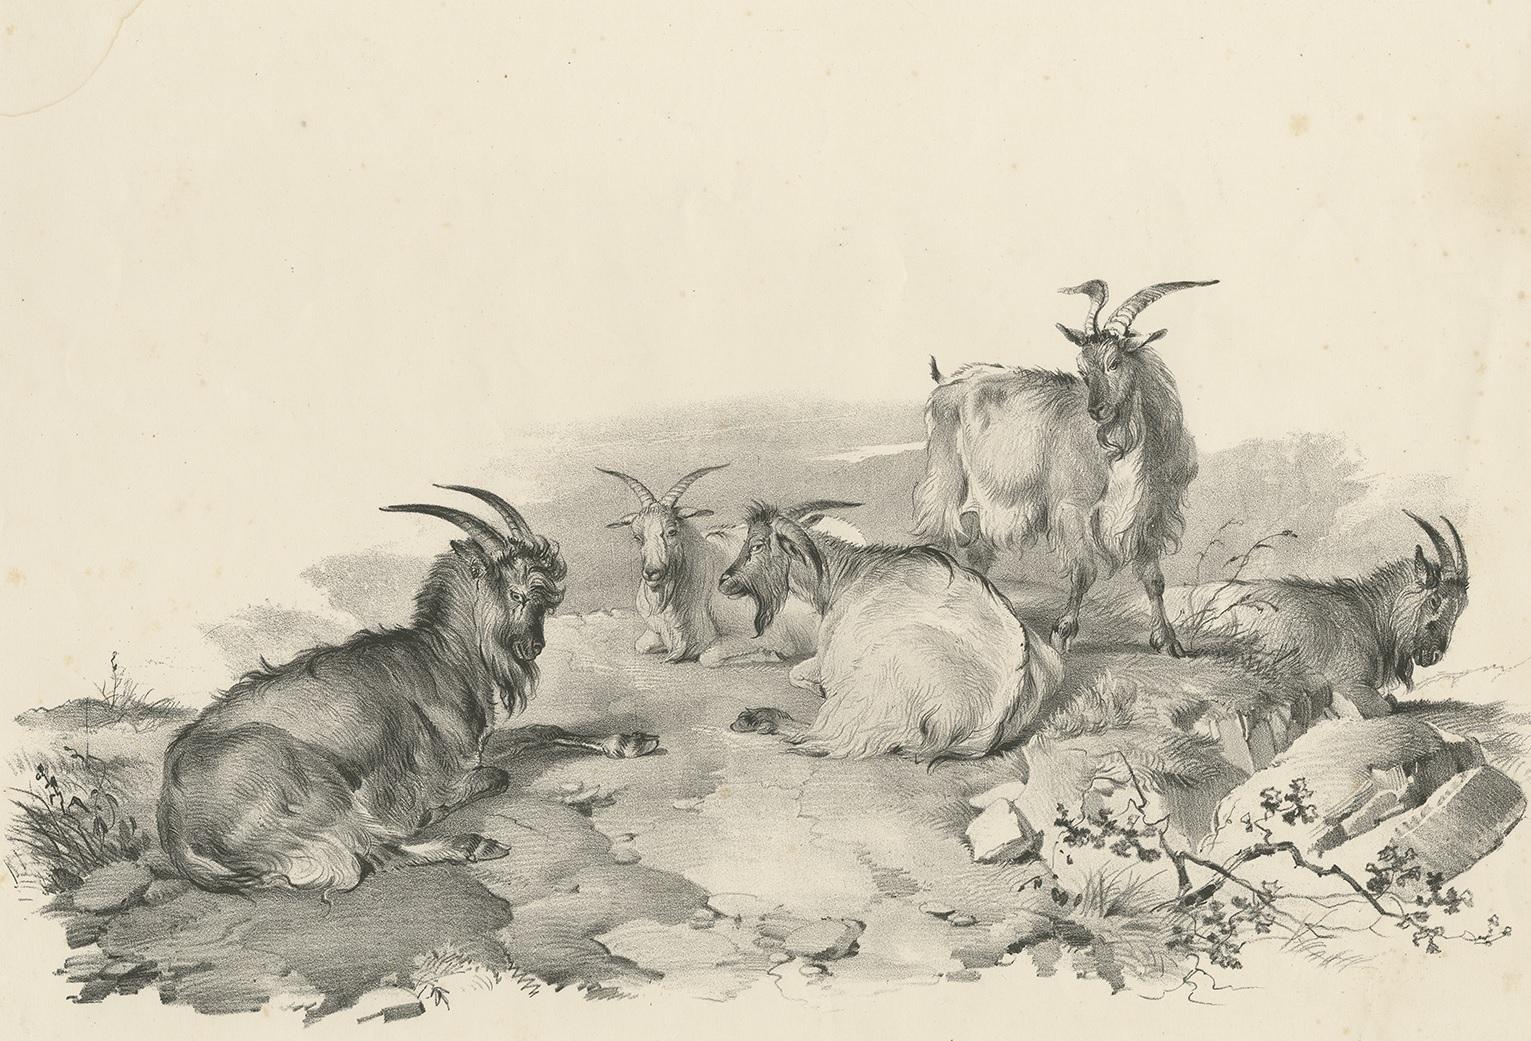 Antique print of various goats. This print originates from 'Cattle Subjects' by Thomas Sidney Cooper. He was an English landscape painter noted for his images of cattle and farm animals.